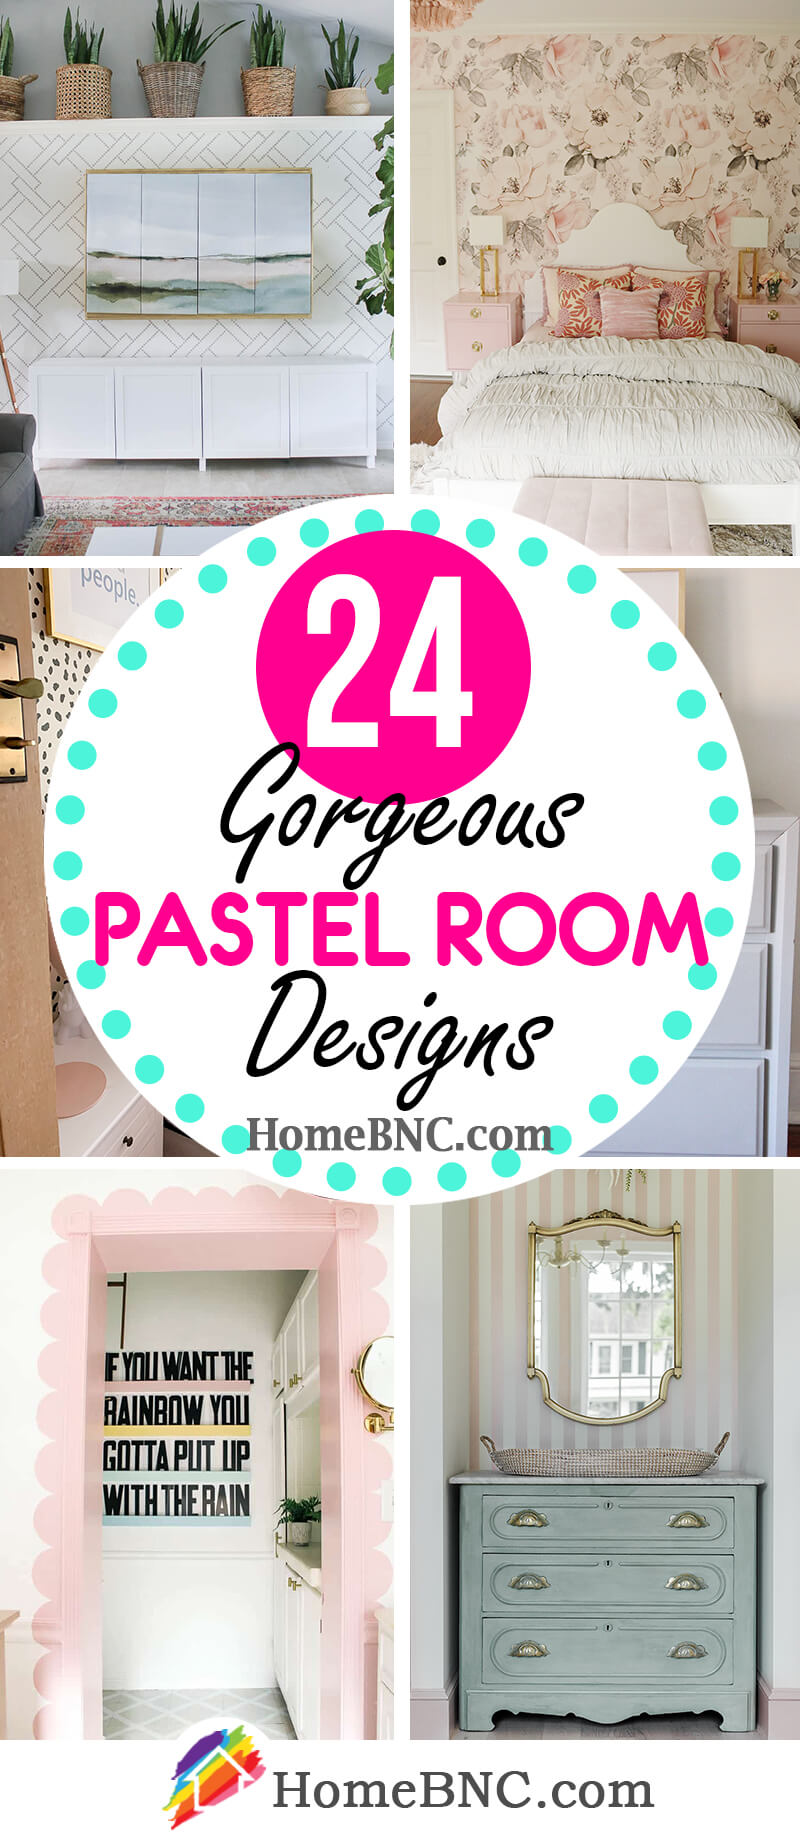 Best Pastel Room Decor Ideas and Designs